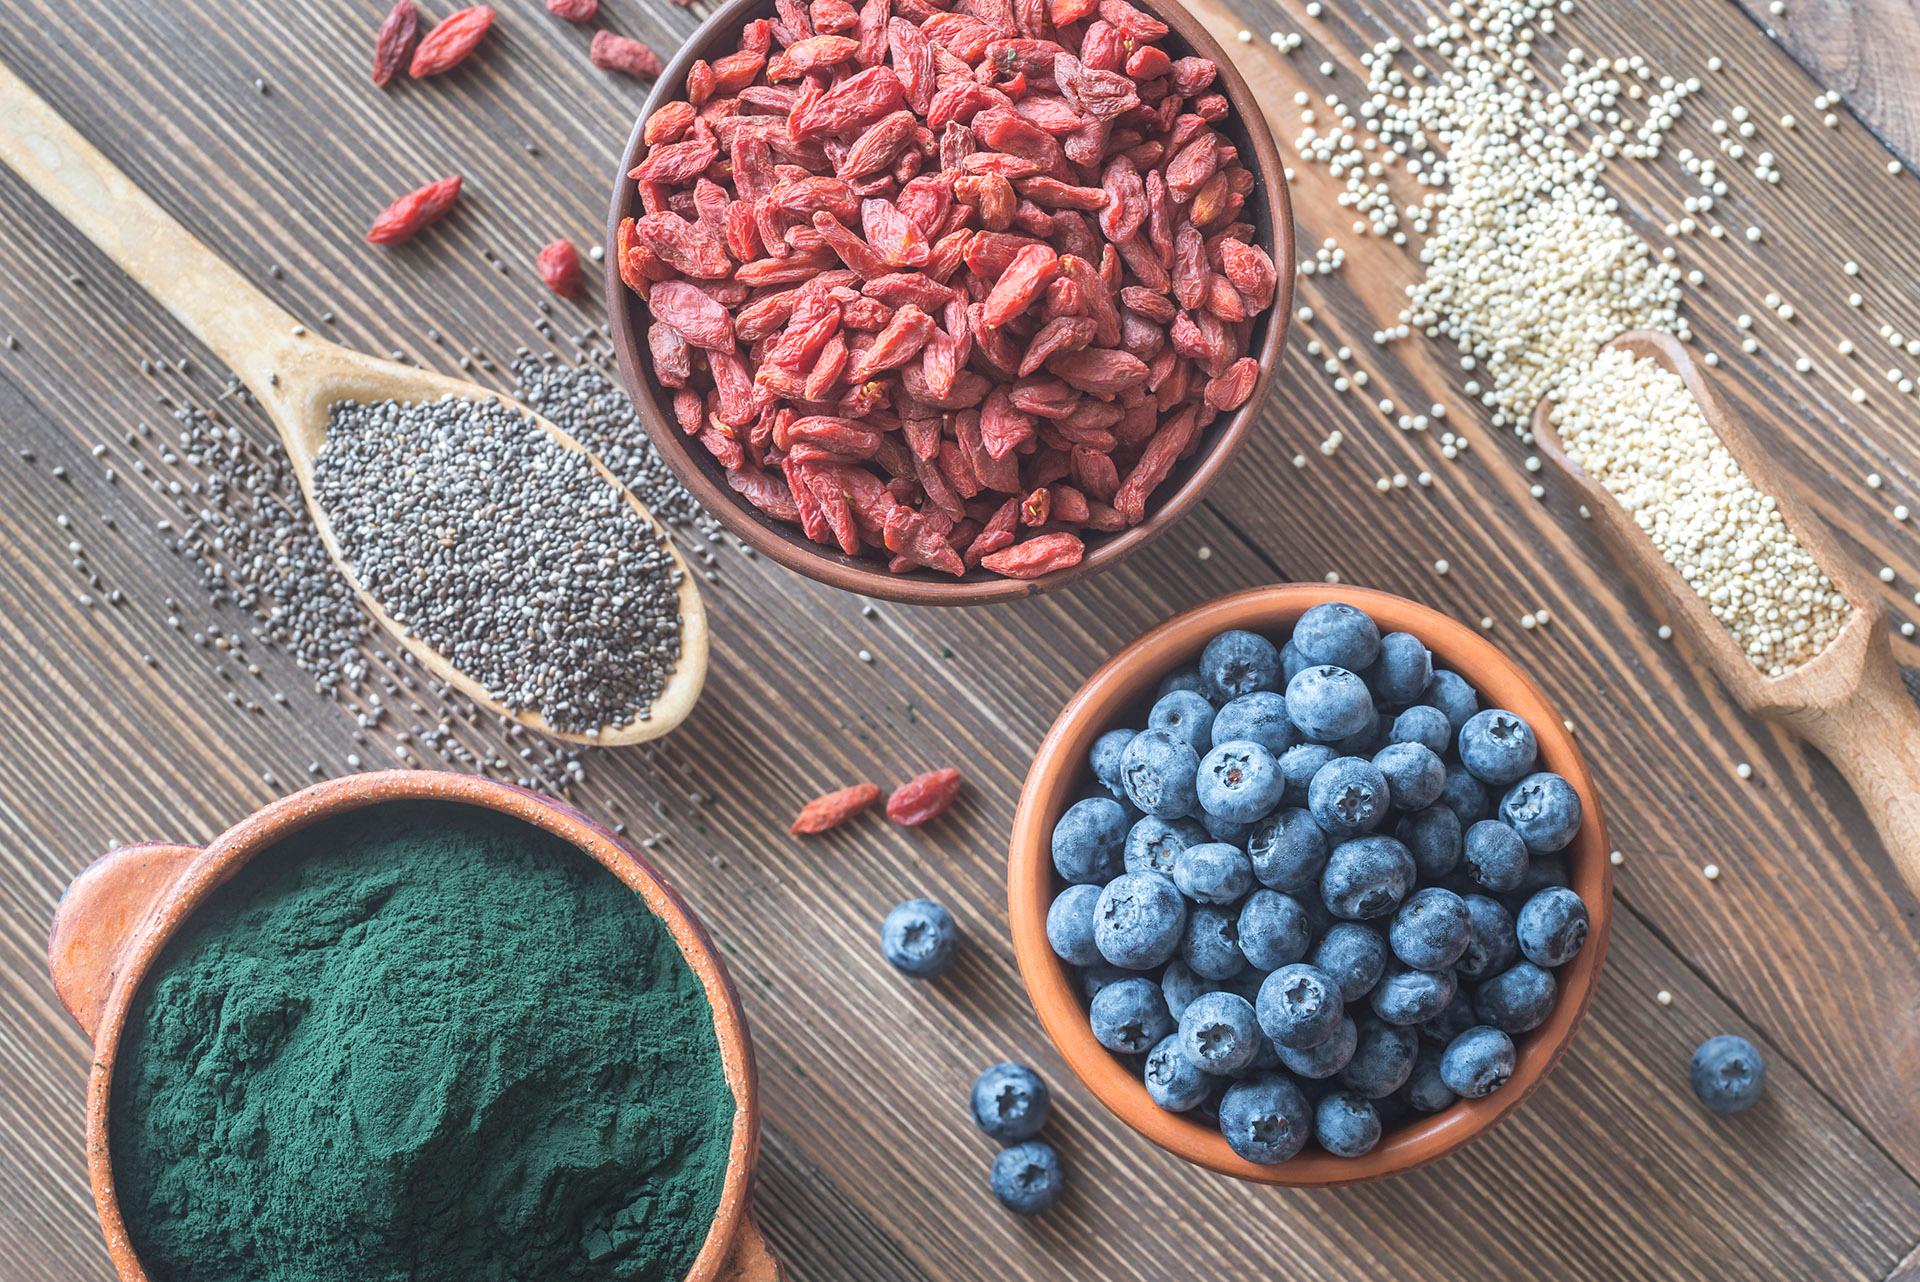 6 Top Everyday Superfoods You Should Incorporate in Your Daily Meals!